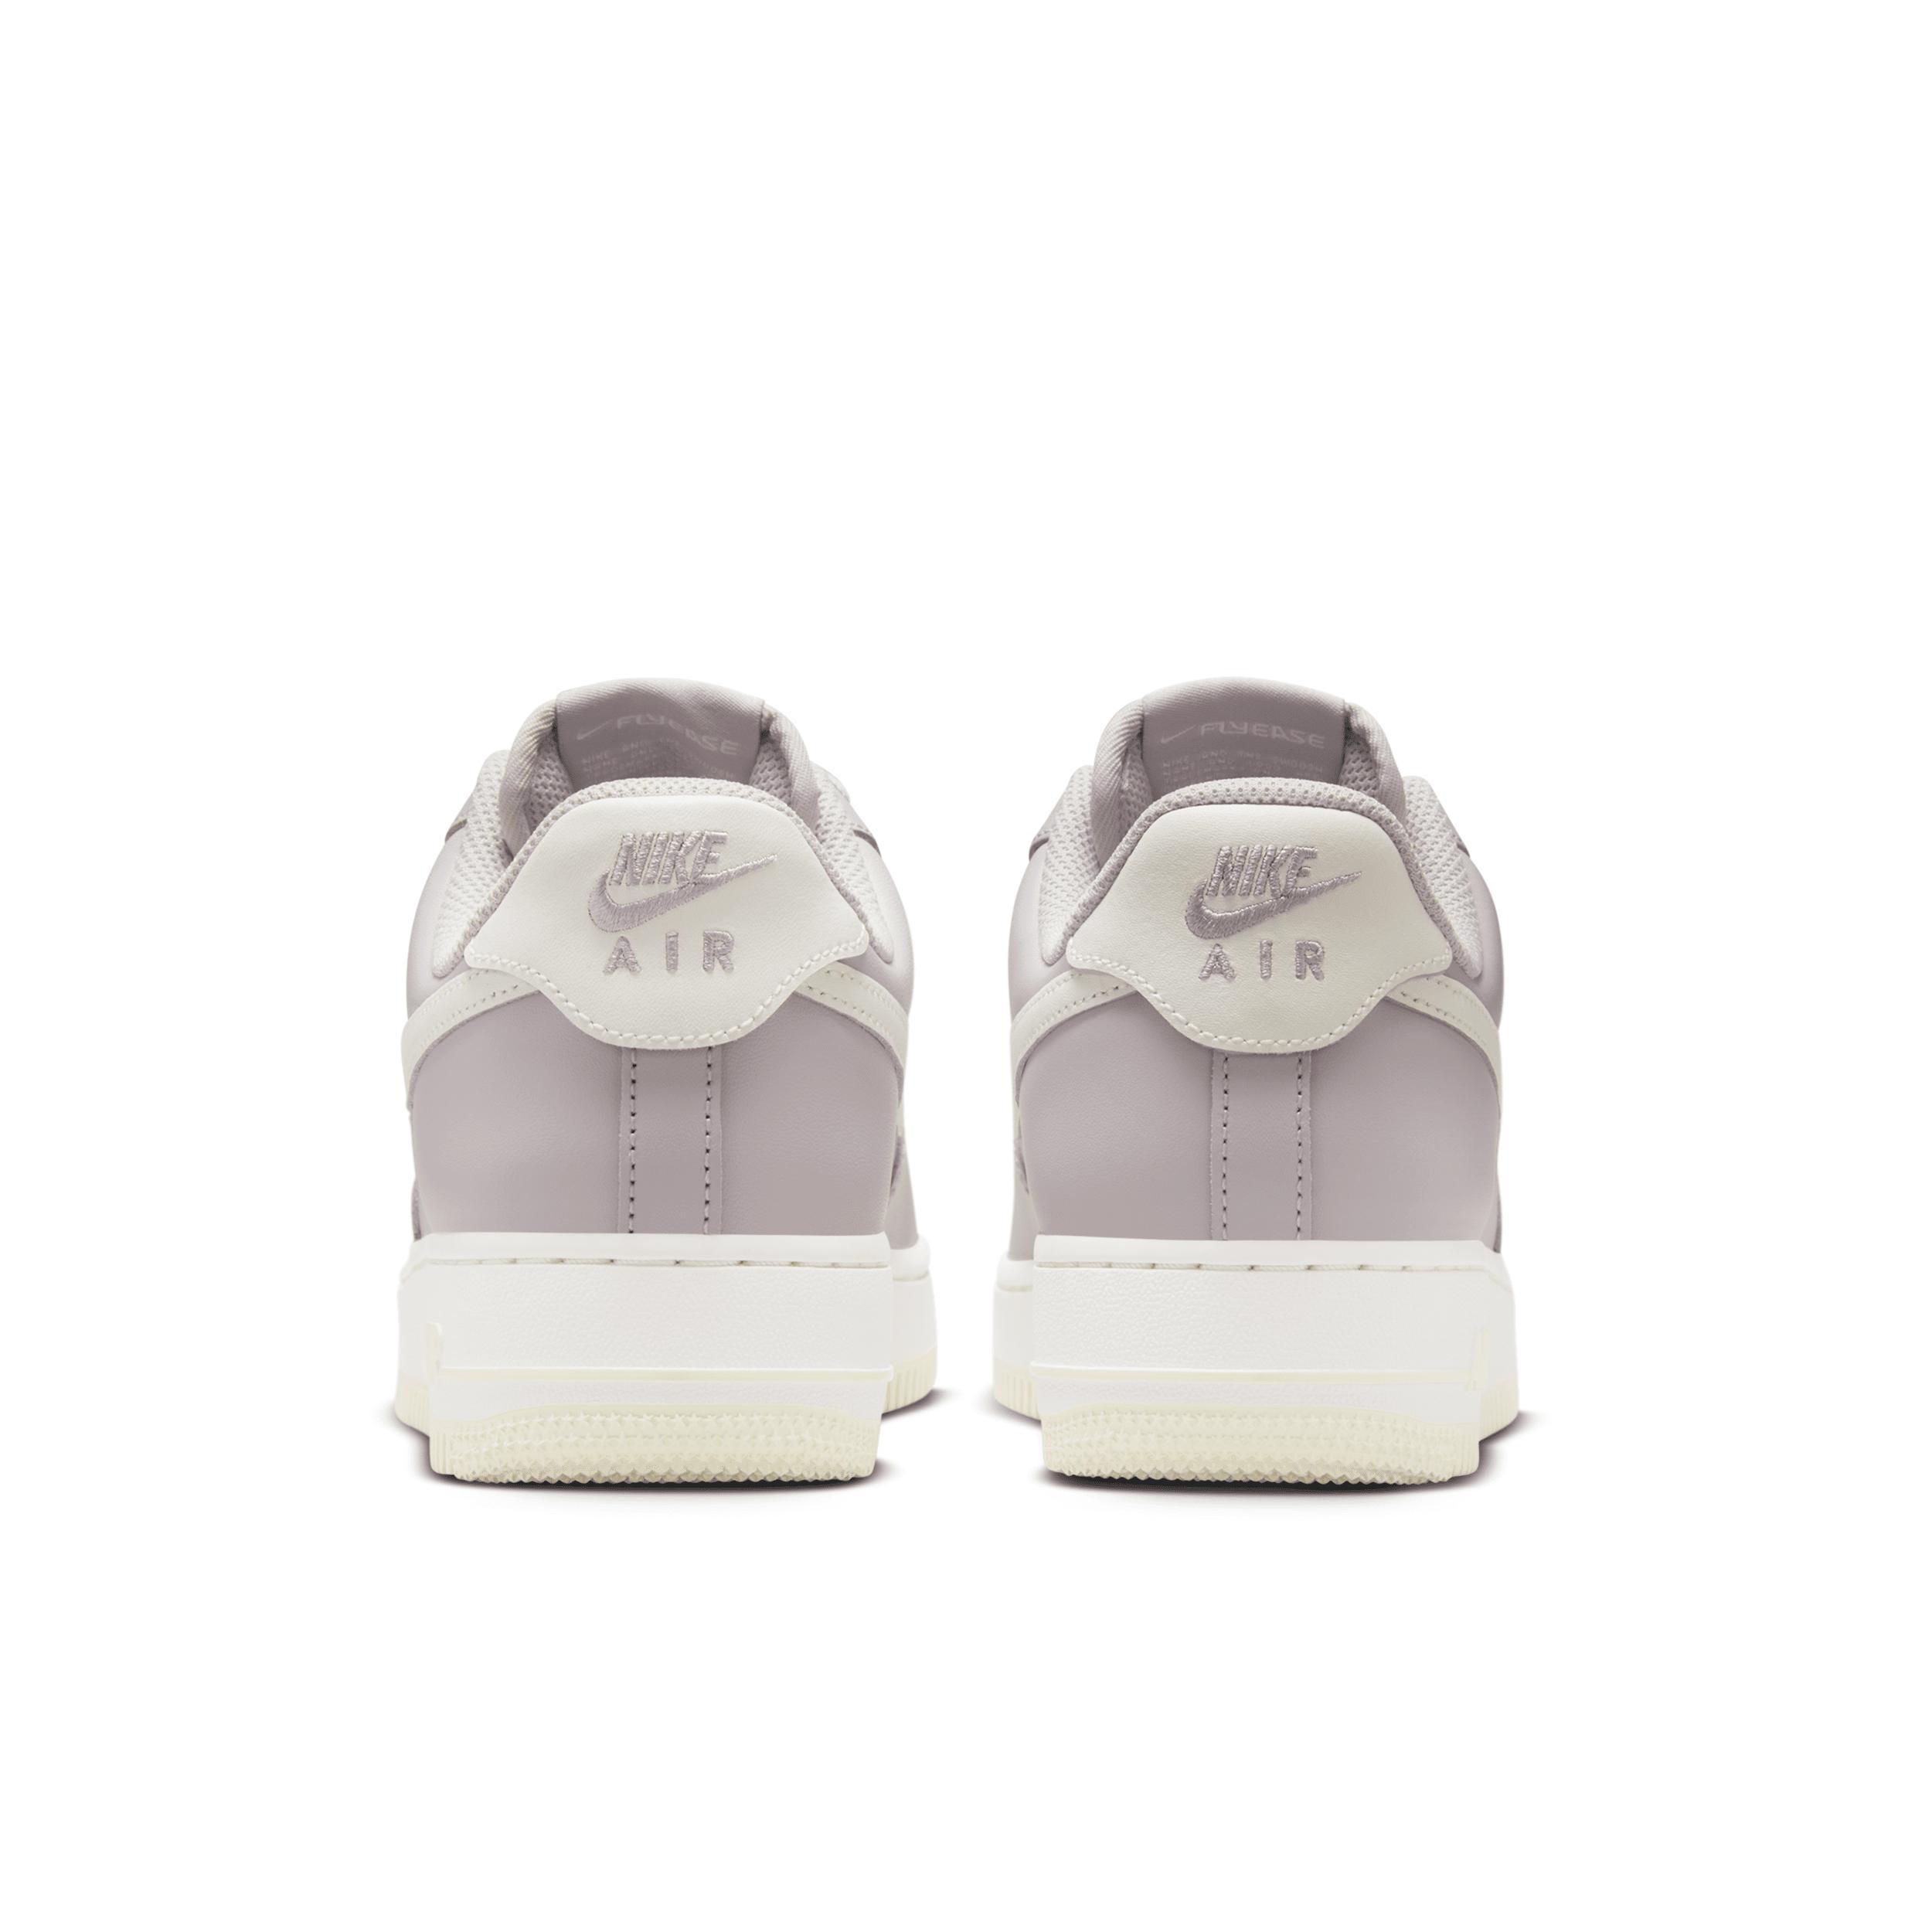 Nike Women's Air Force 1 '07 EasyOn Shoes Product Image